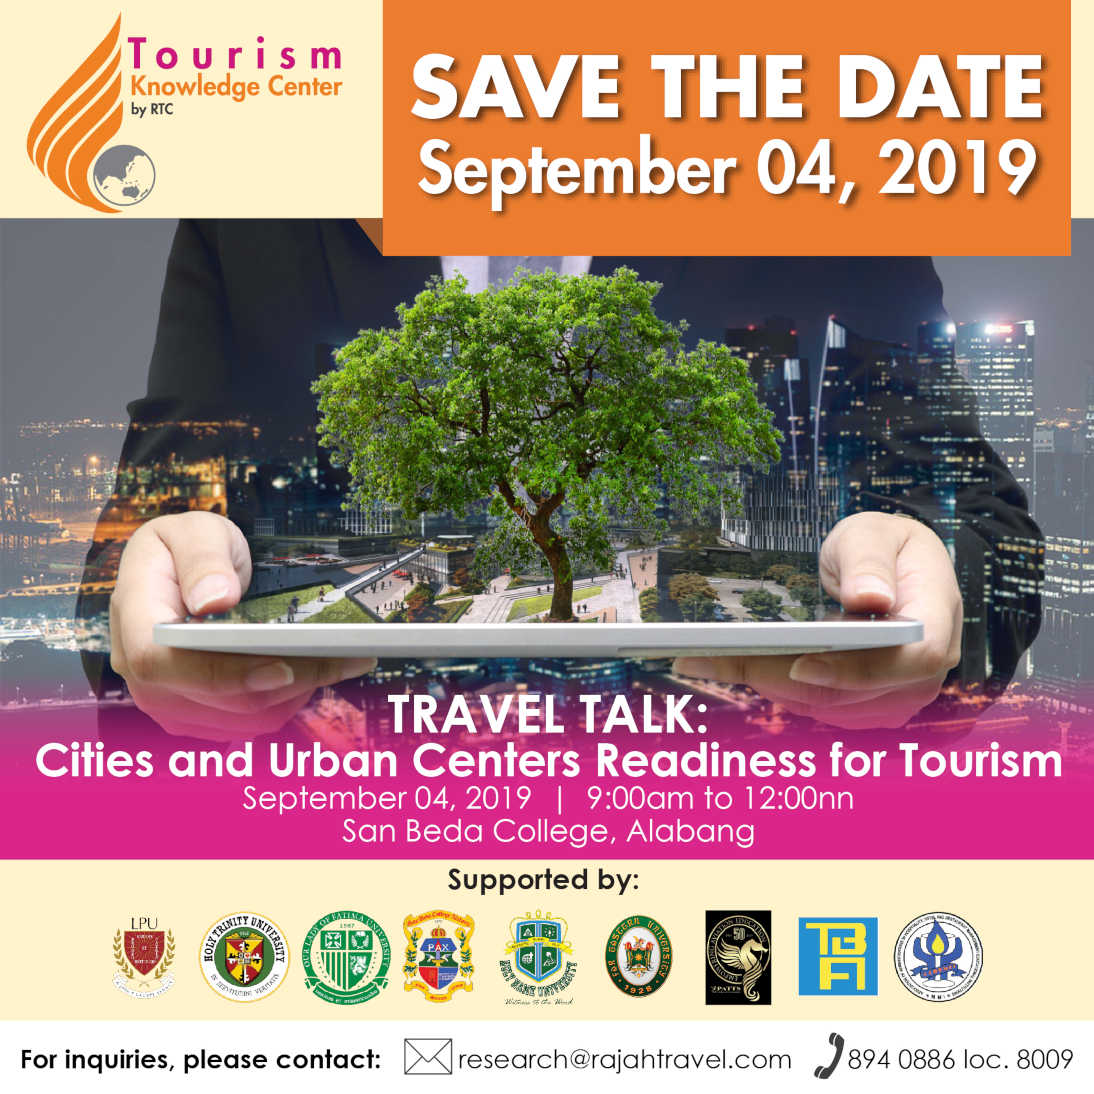 Travel Talk - Cities and Urban Centers Readiness for Tourism 